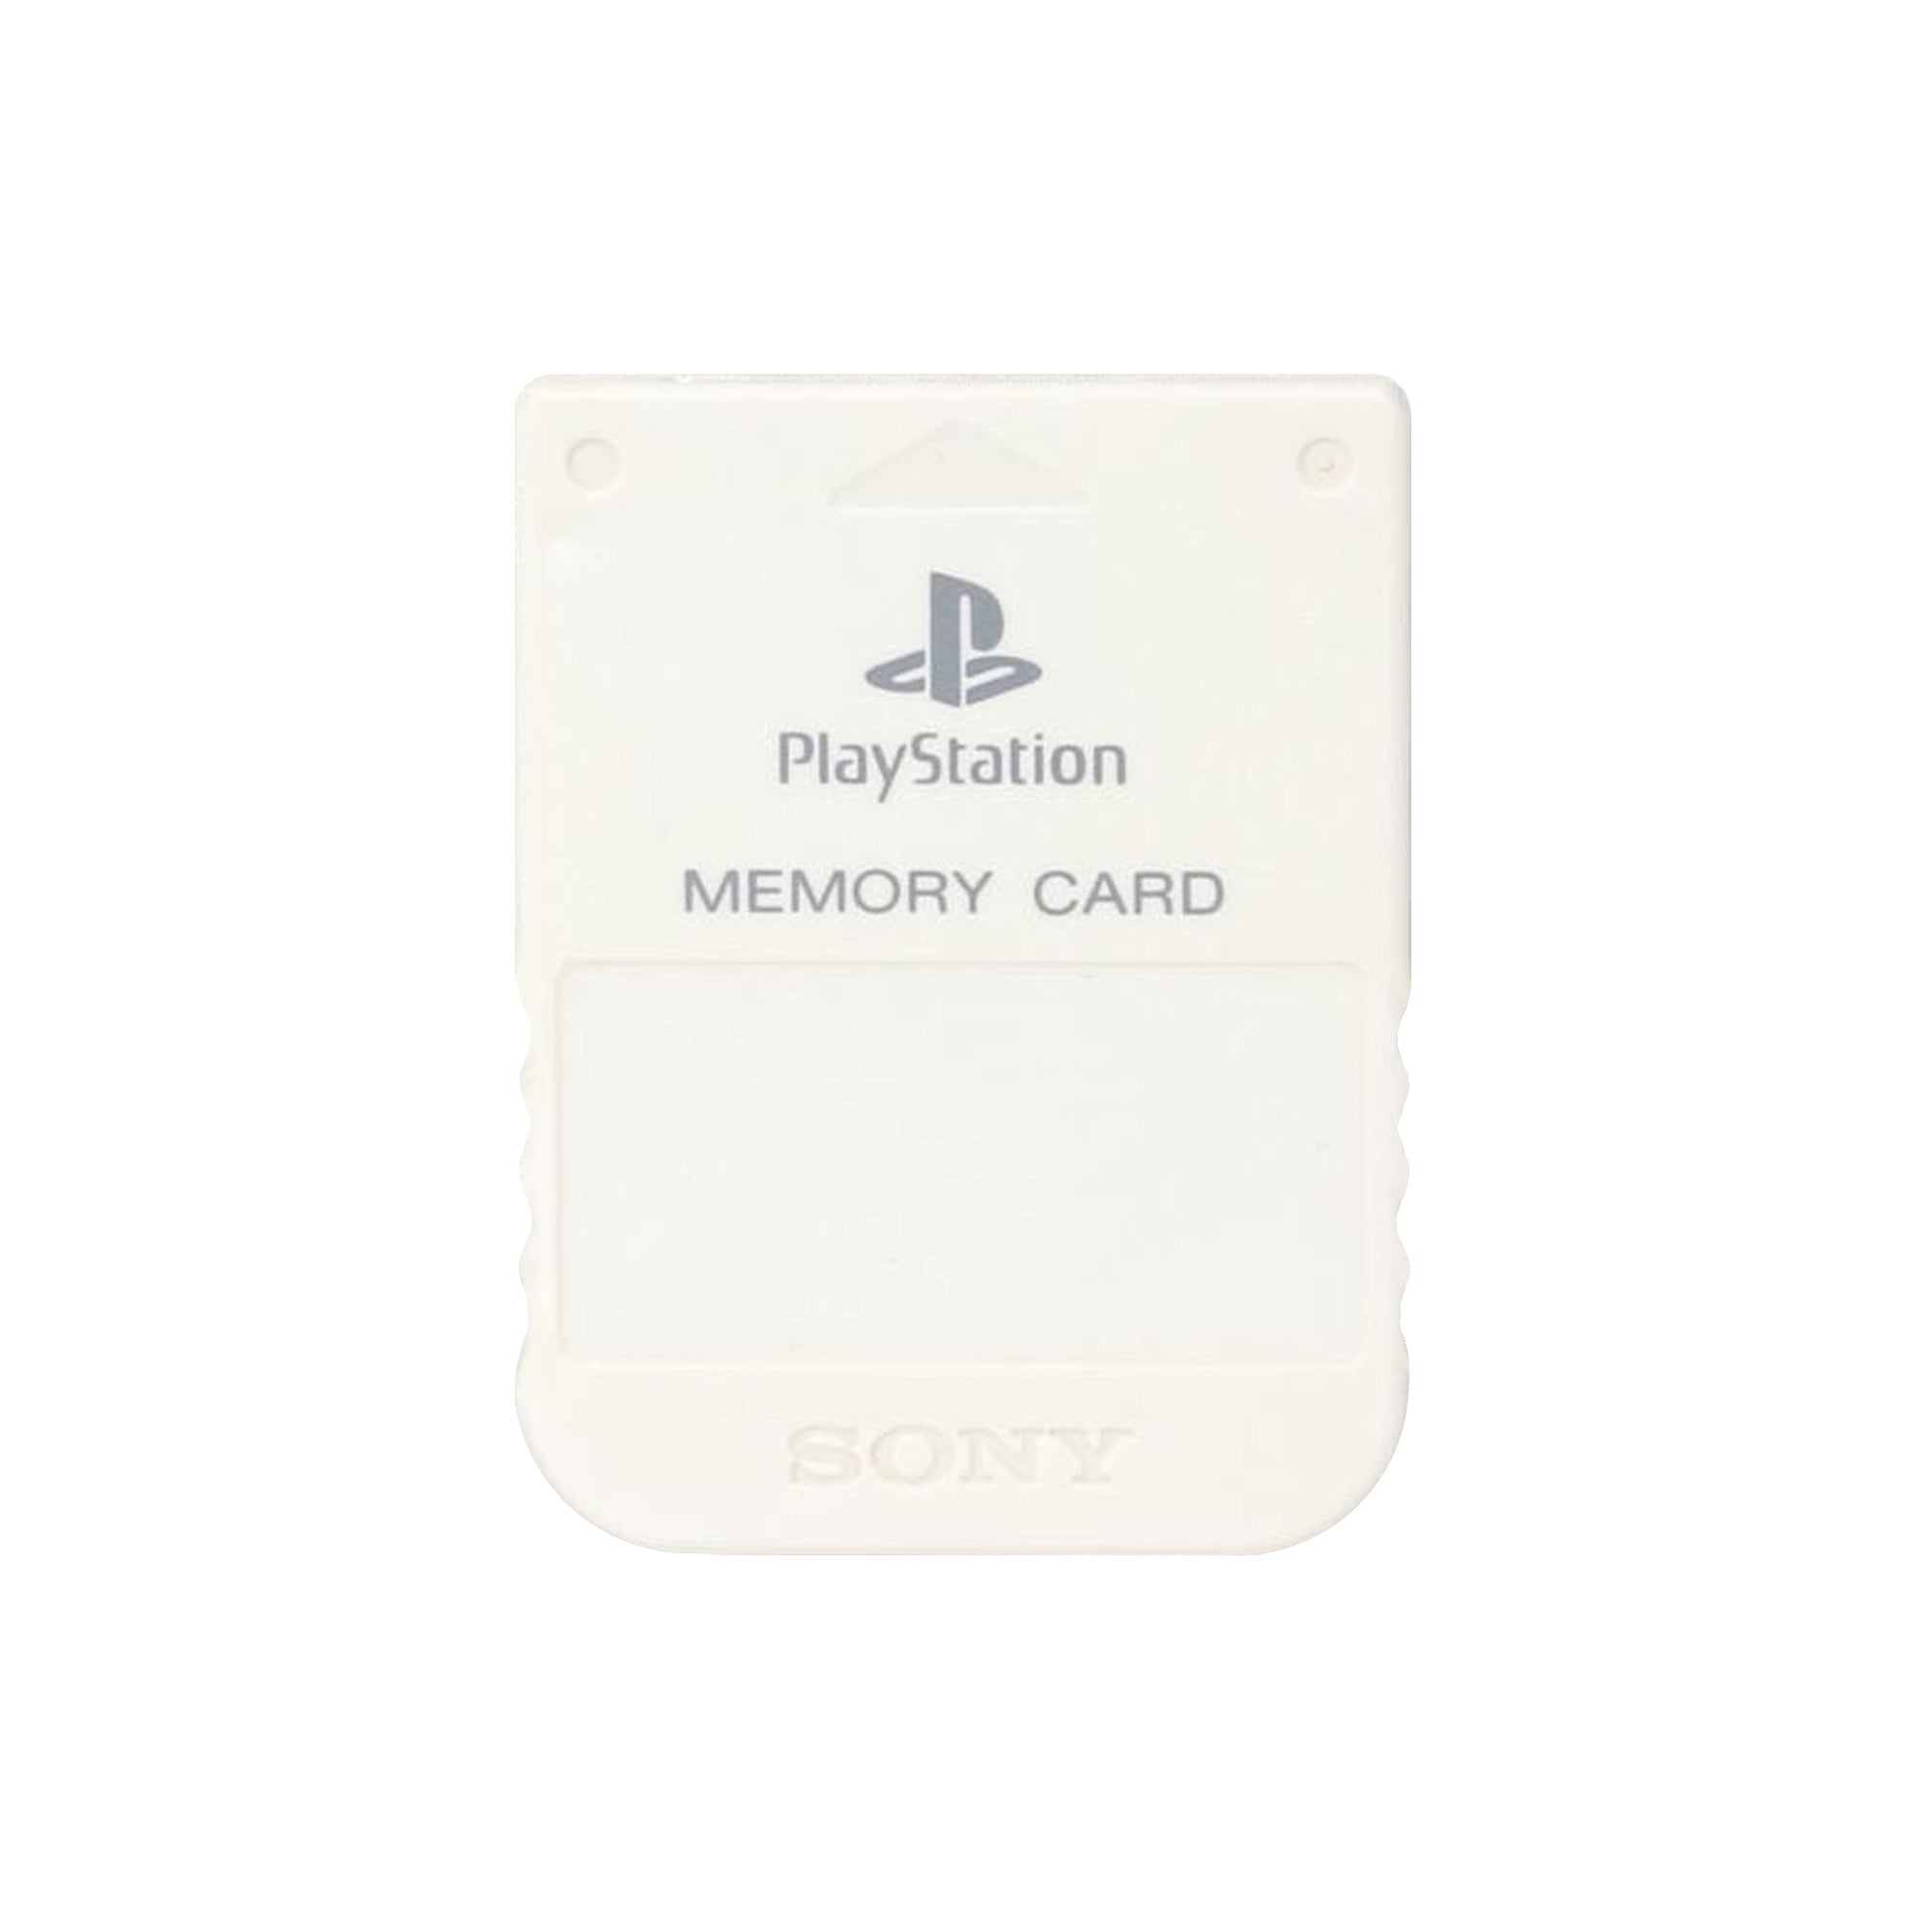 Sony PlayStation 1 Memory Card - White - YourGamingShop.com - Buy, Sell, Trade Video Games Online. 120 Day Warranty. Satisfaction Guaranteed.